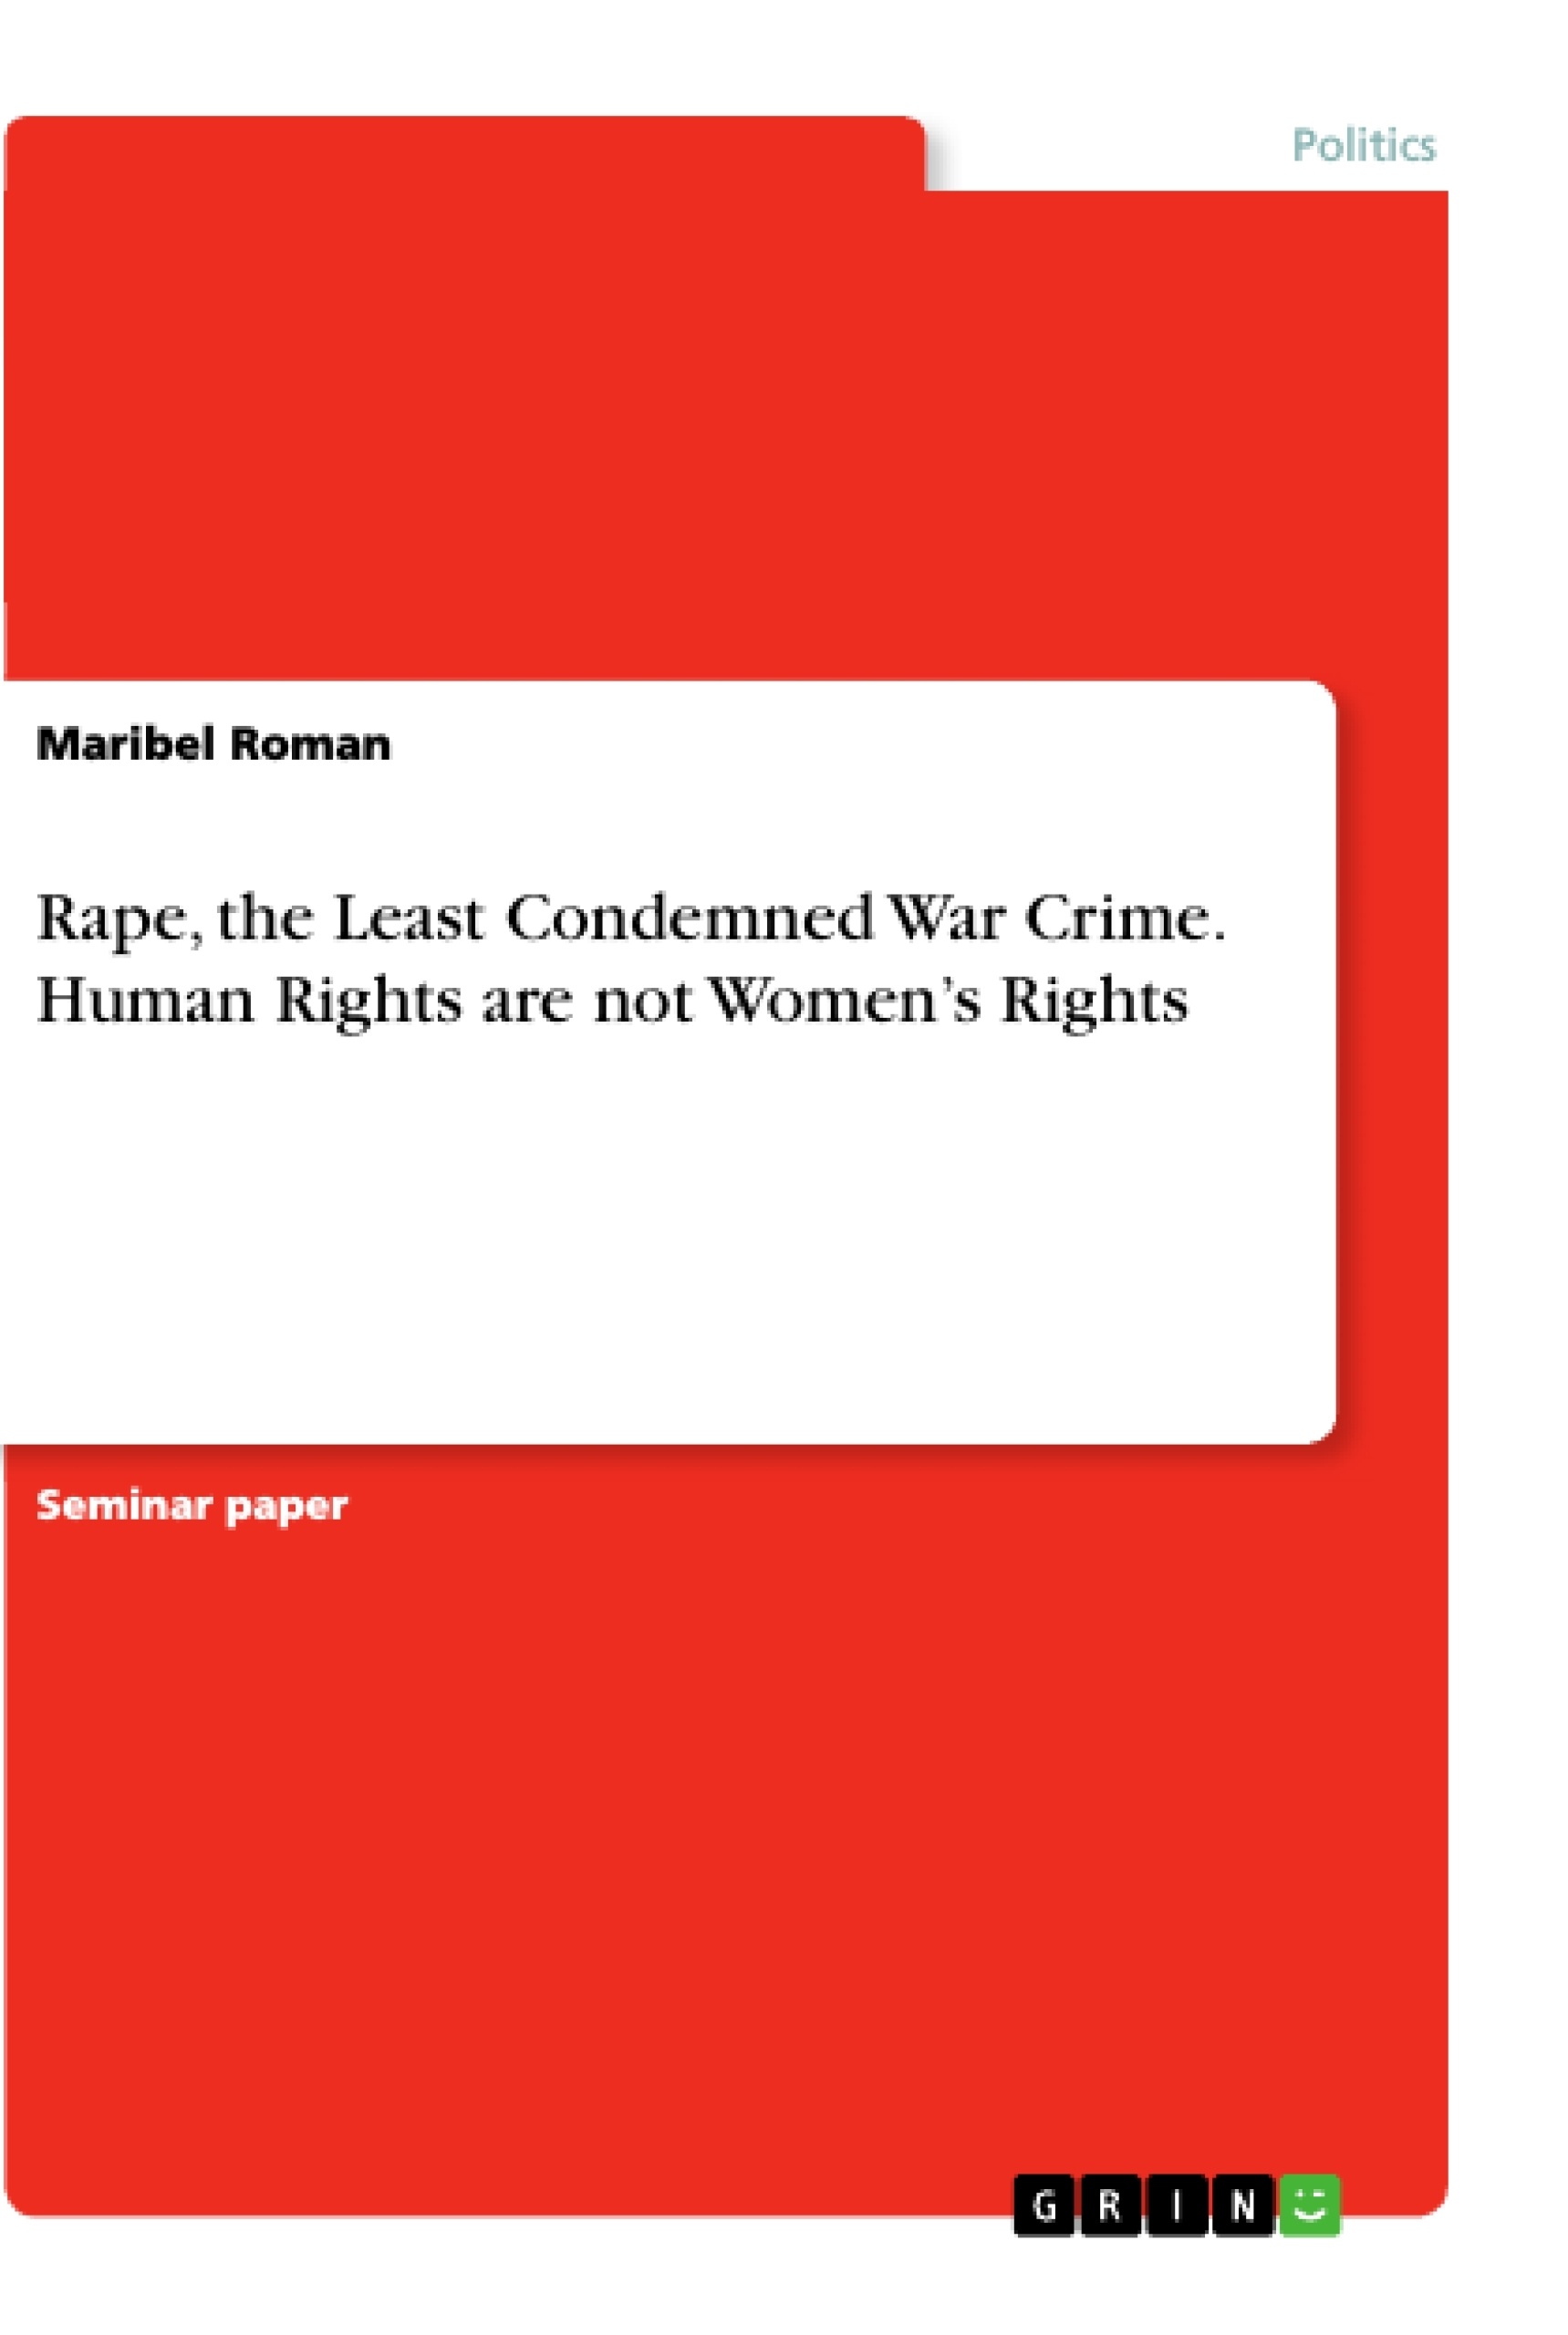 Title: Rape, the Least Condemned War Crime. Human Rights are not Women’s Rights